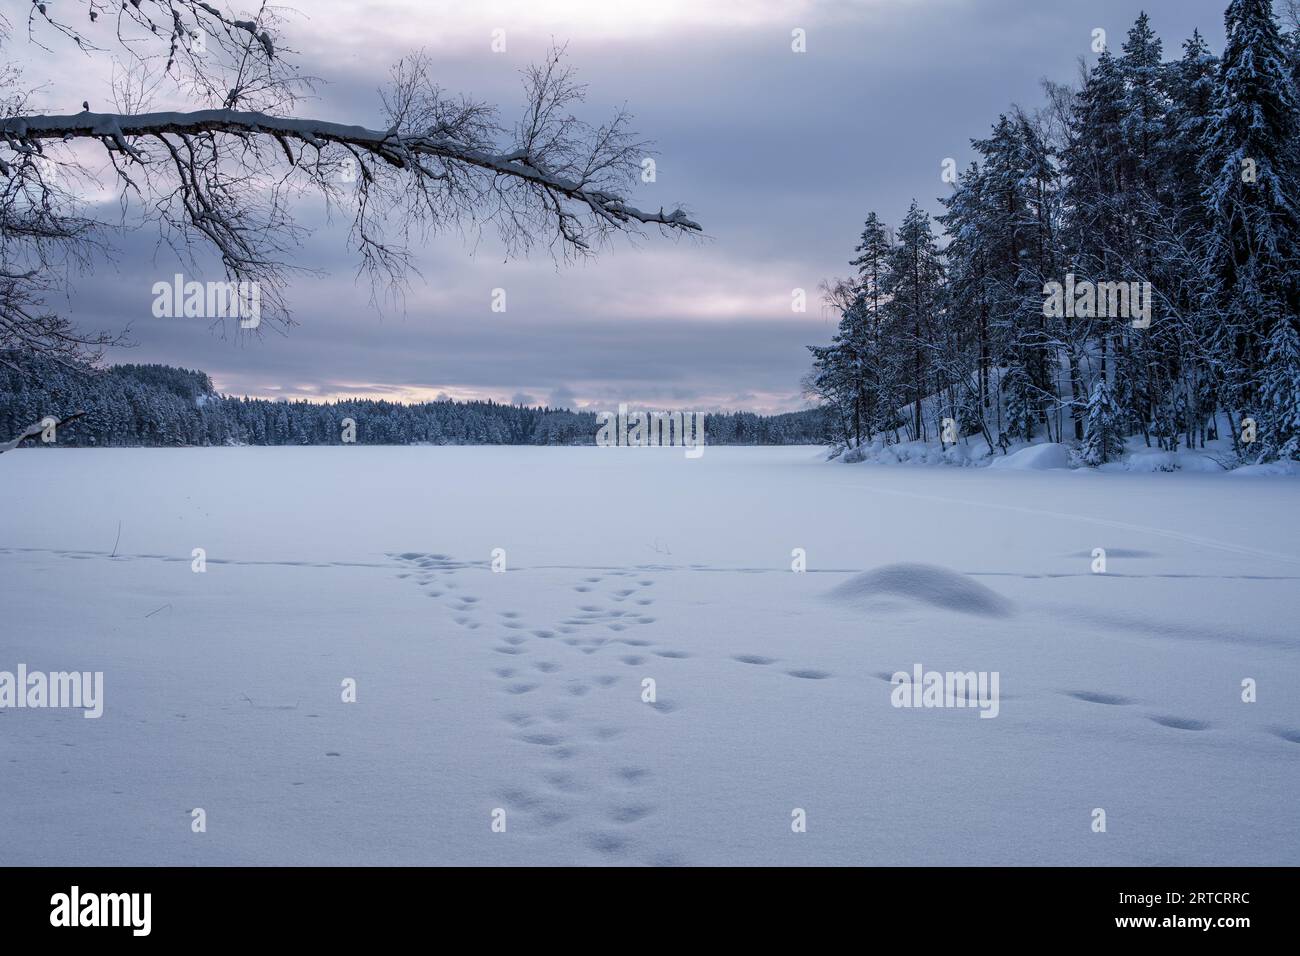 Winter landscape of a frozen lake with tree branch and footsteps in the foreground. Repovesi National Park, Kouvola, Finland. Stock Photo